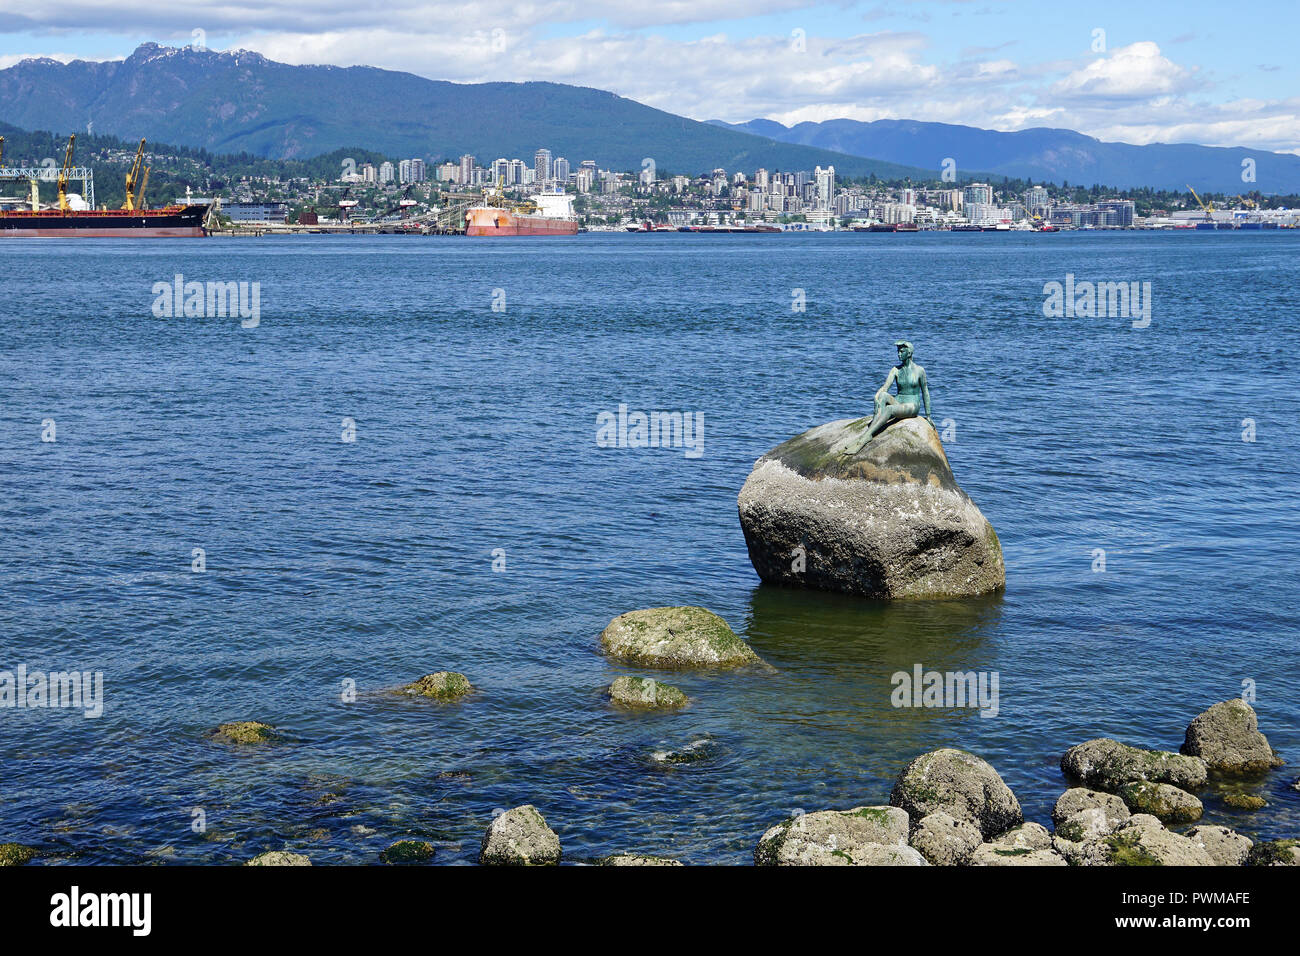 Girl in wetsuit, sculpture at Stanley Park, Vancouver, Canada Stock Photo